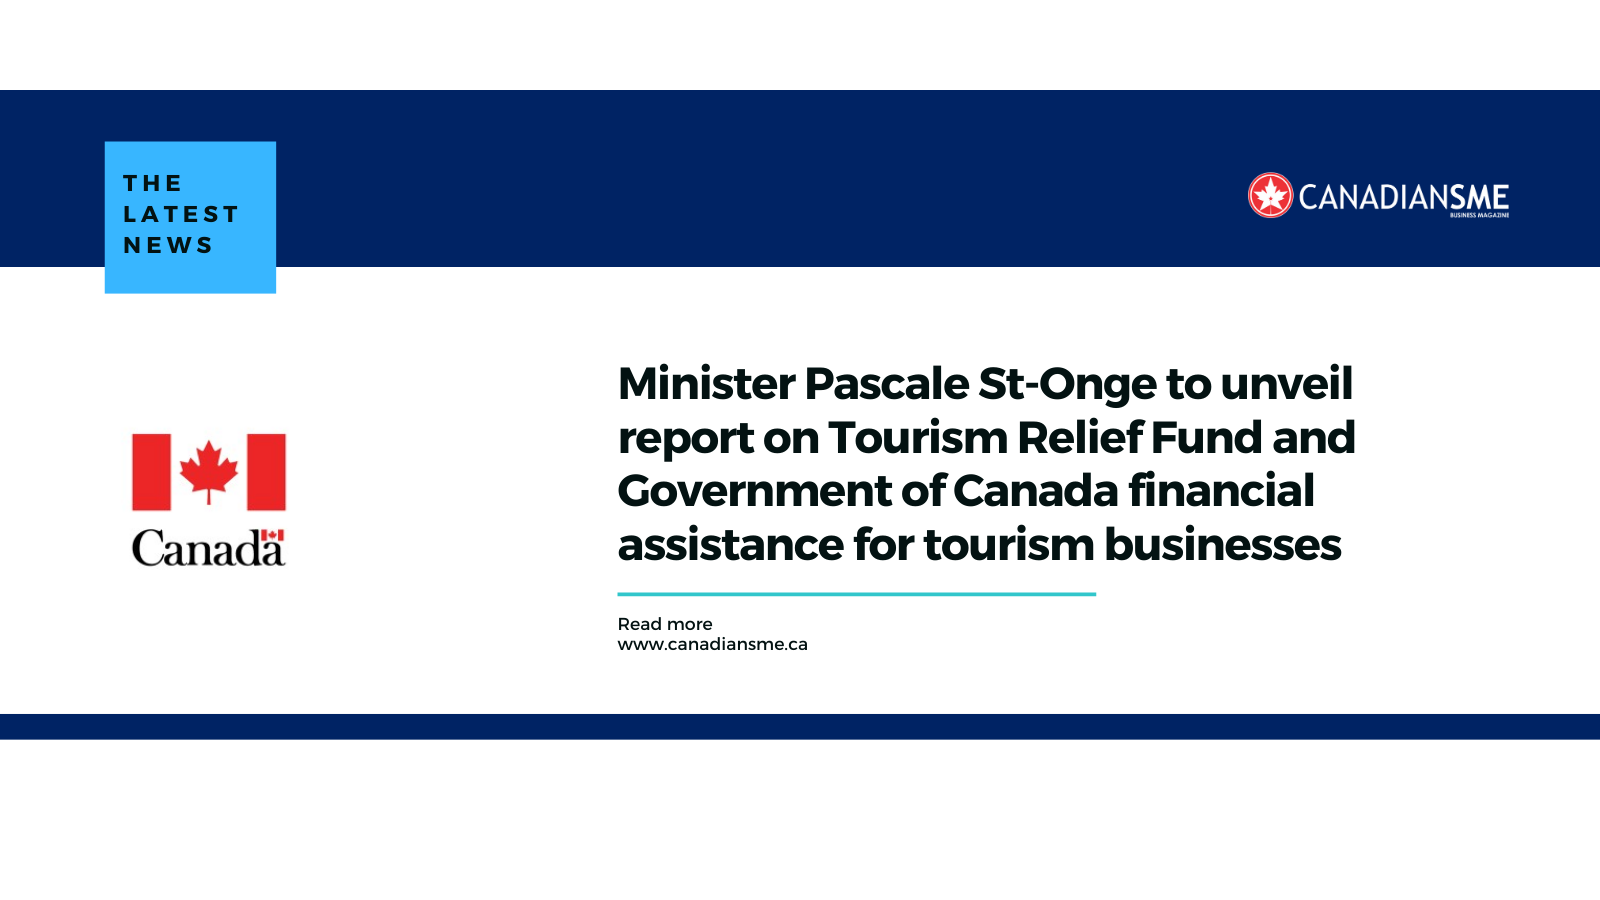 Minister Pascale St-Onge to unveil report on Tourism Relief Fund and Government of Canada financial assistance for tourism businesses